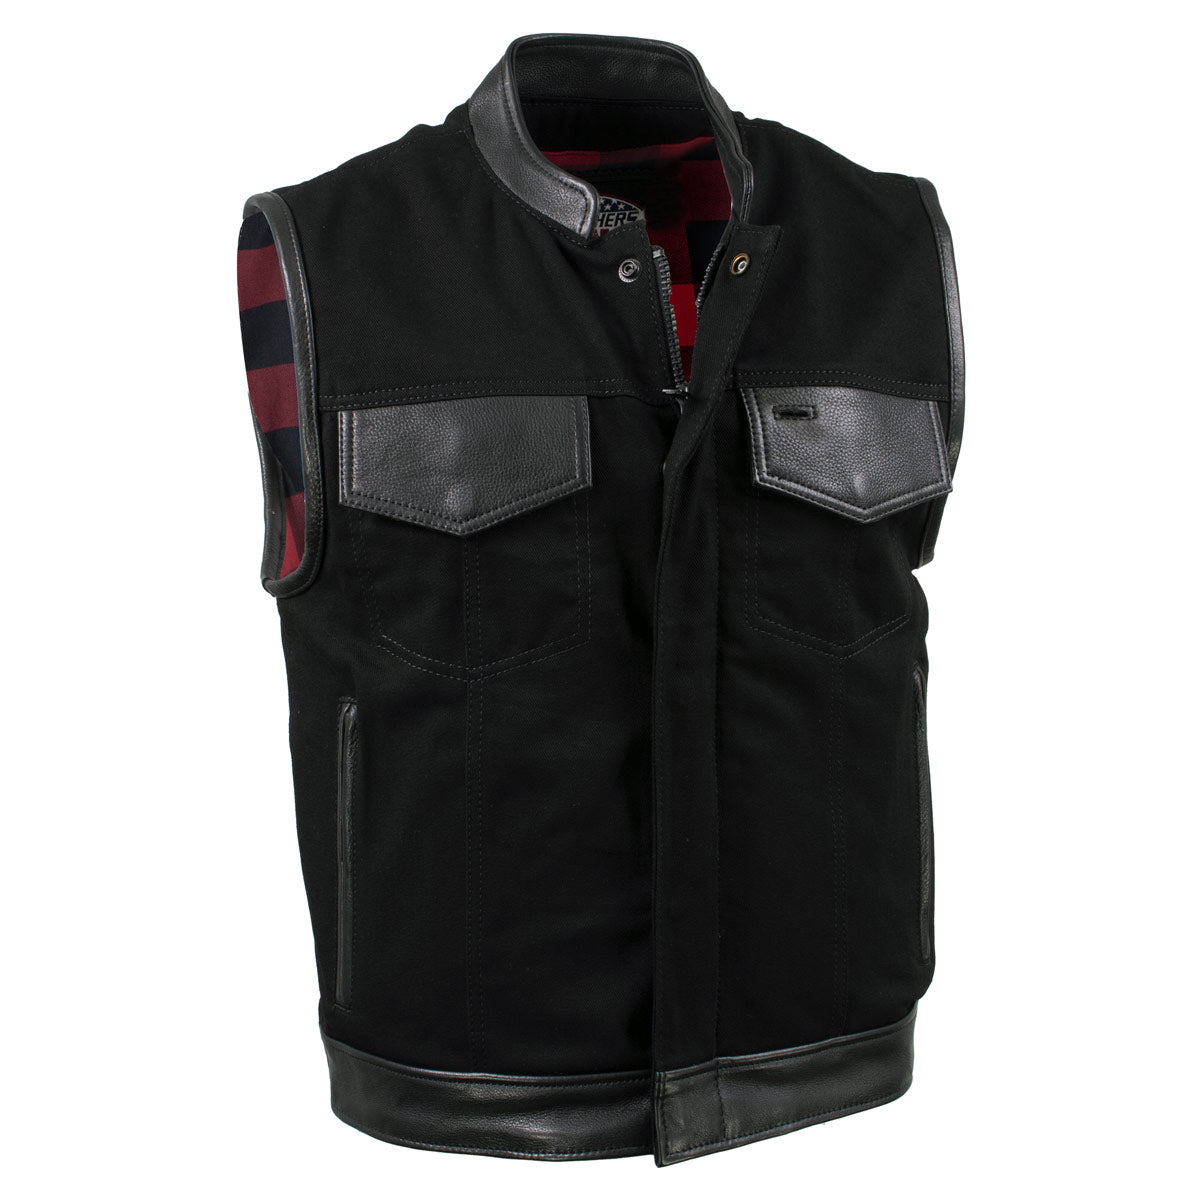 Milwaukee Leather USA MADE MLVSM5101 Men's Black 'Burn Out' Denim and Leather Motorcycle Vest with Plaid Red Lining